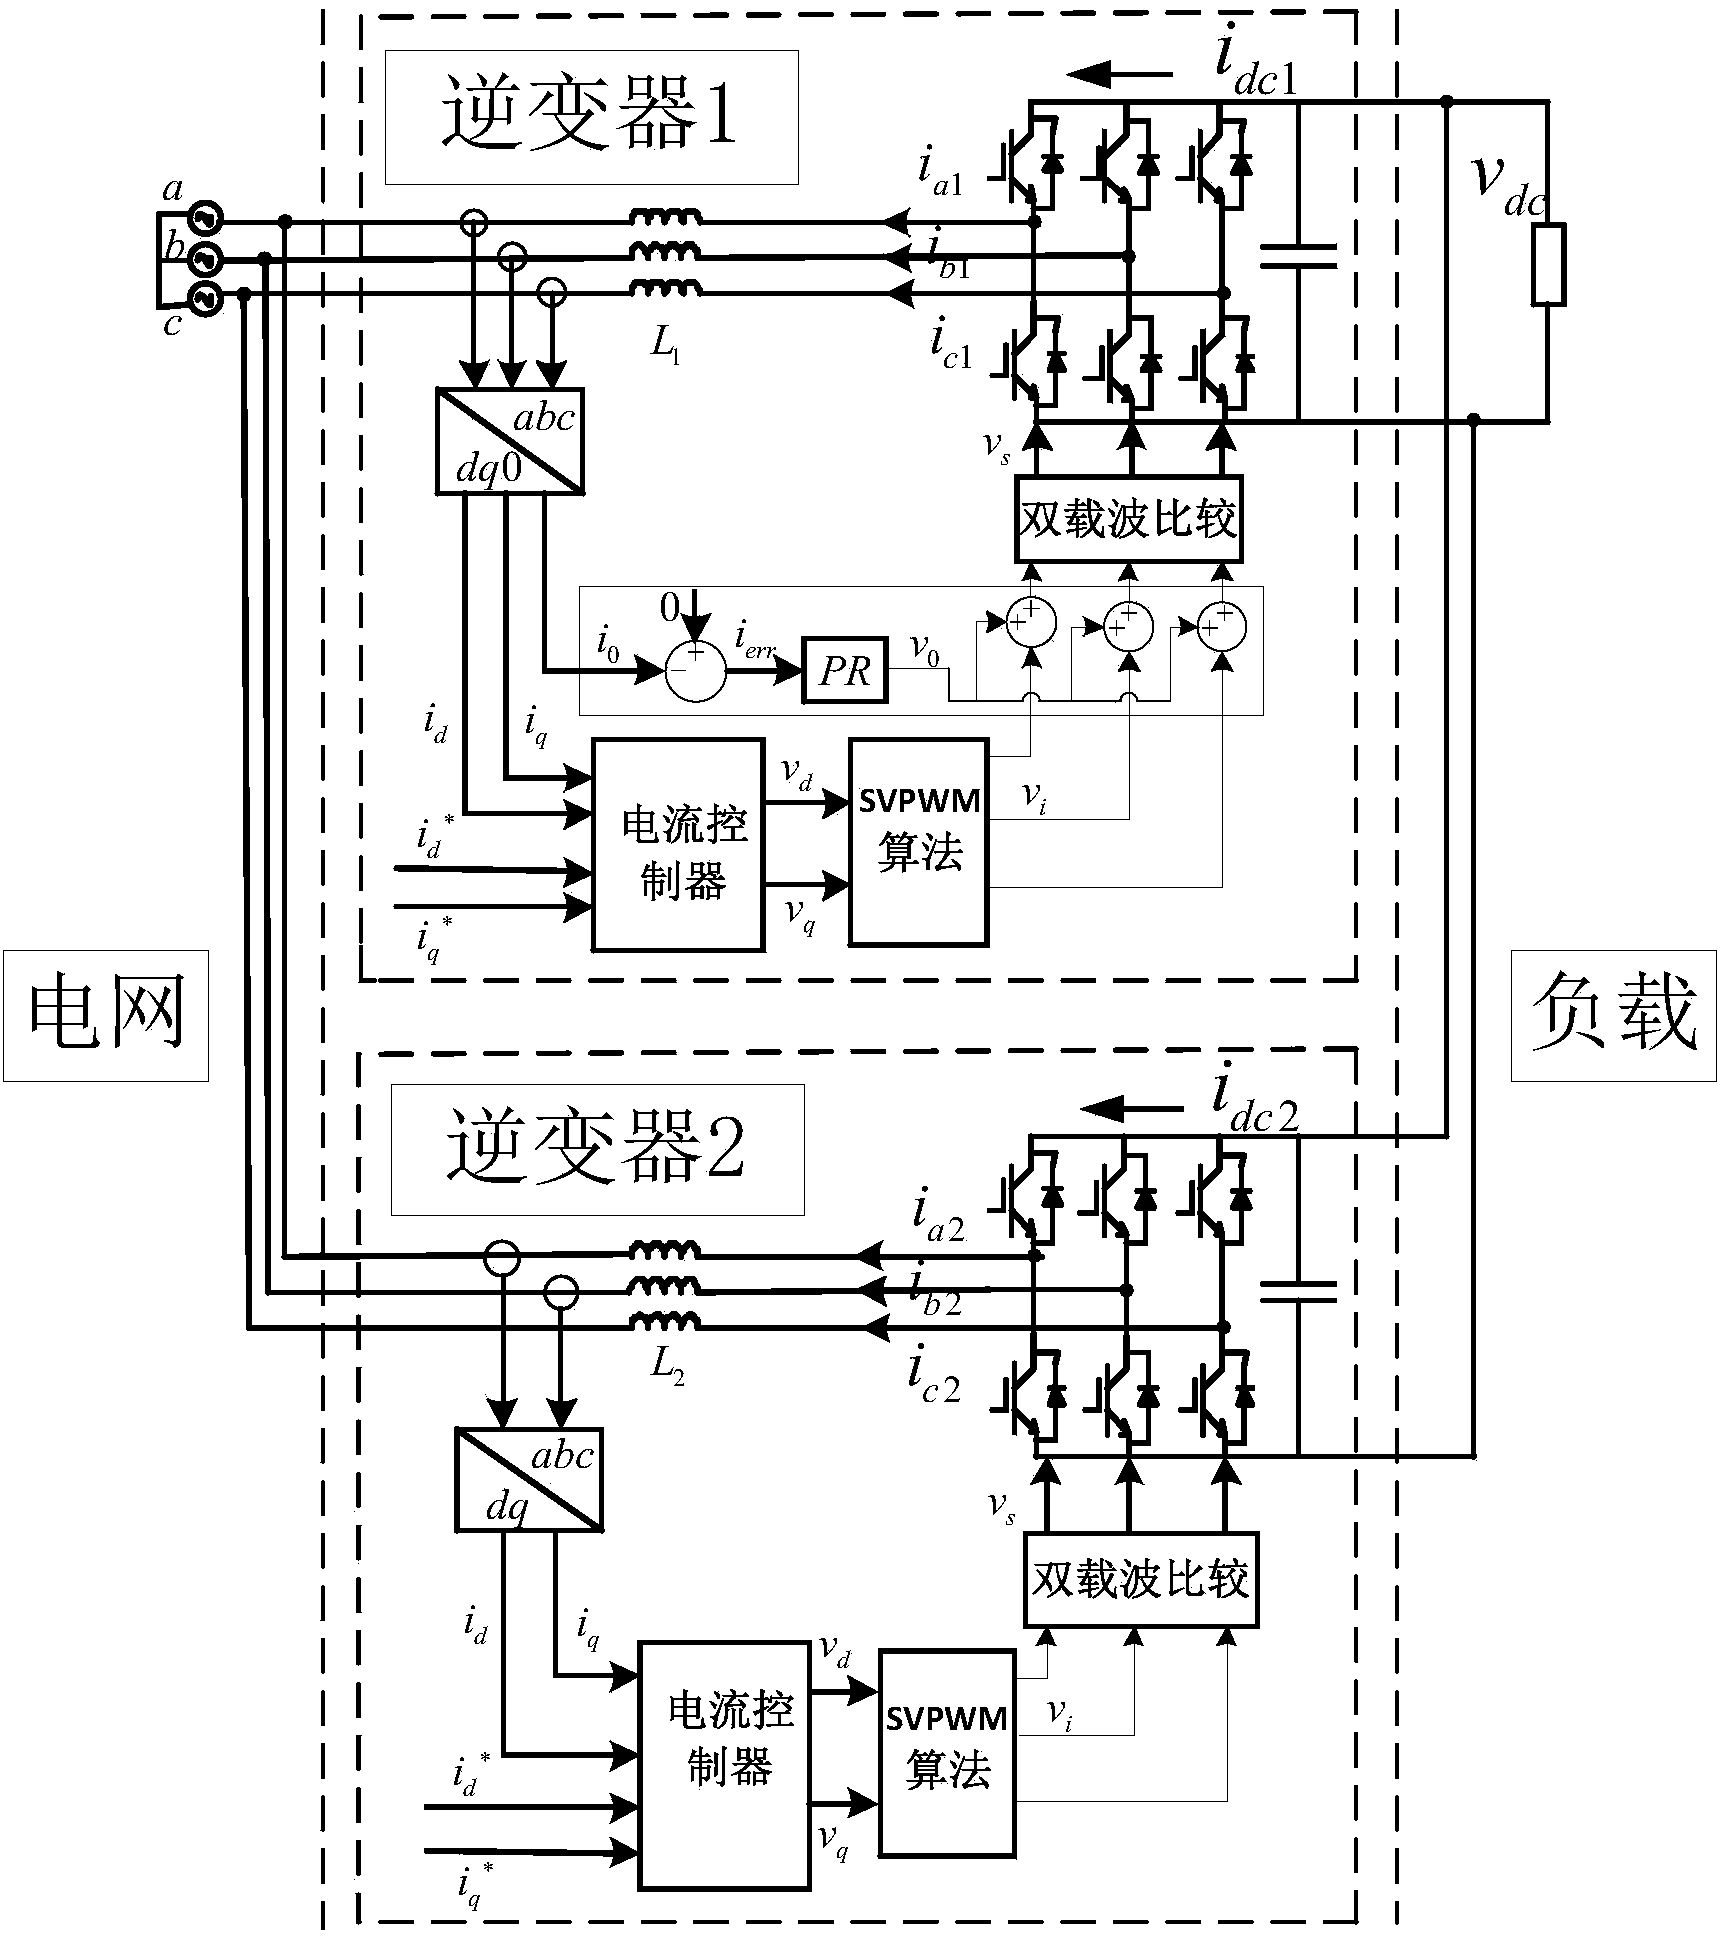 Inverter parallel-connection loop current restraining system based on PR control and dual-carrier modulation